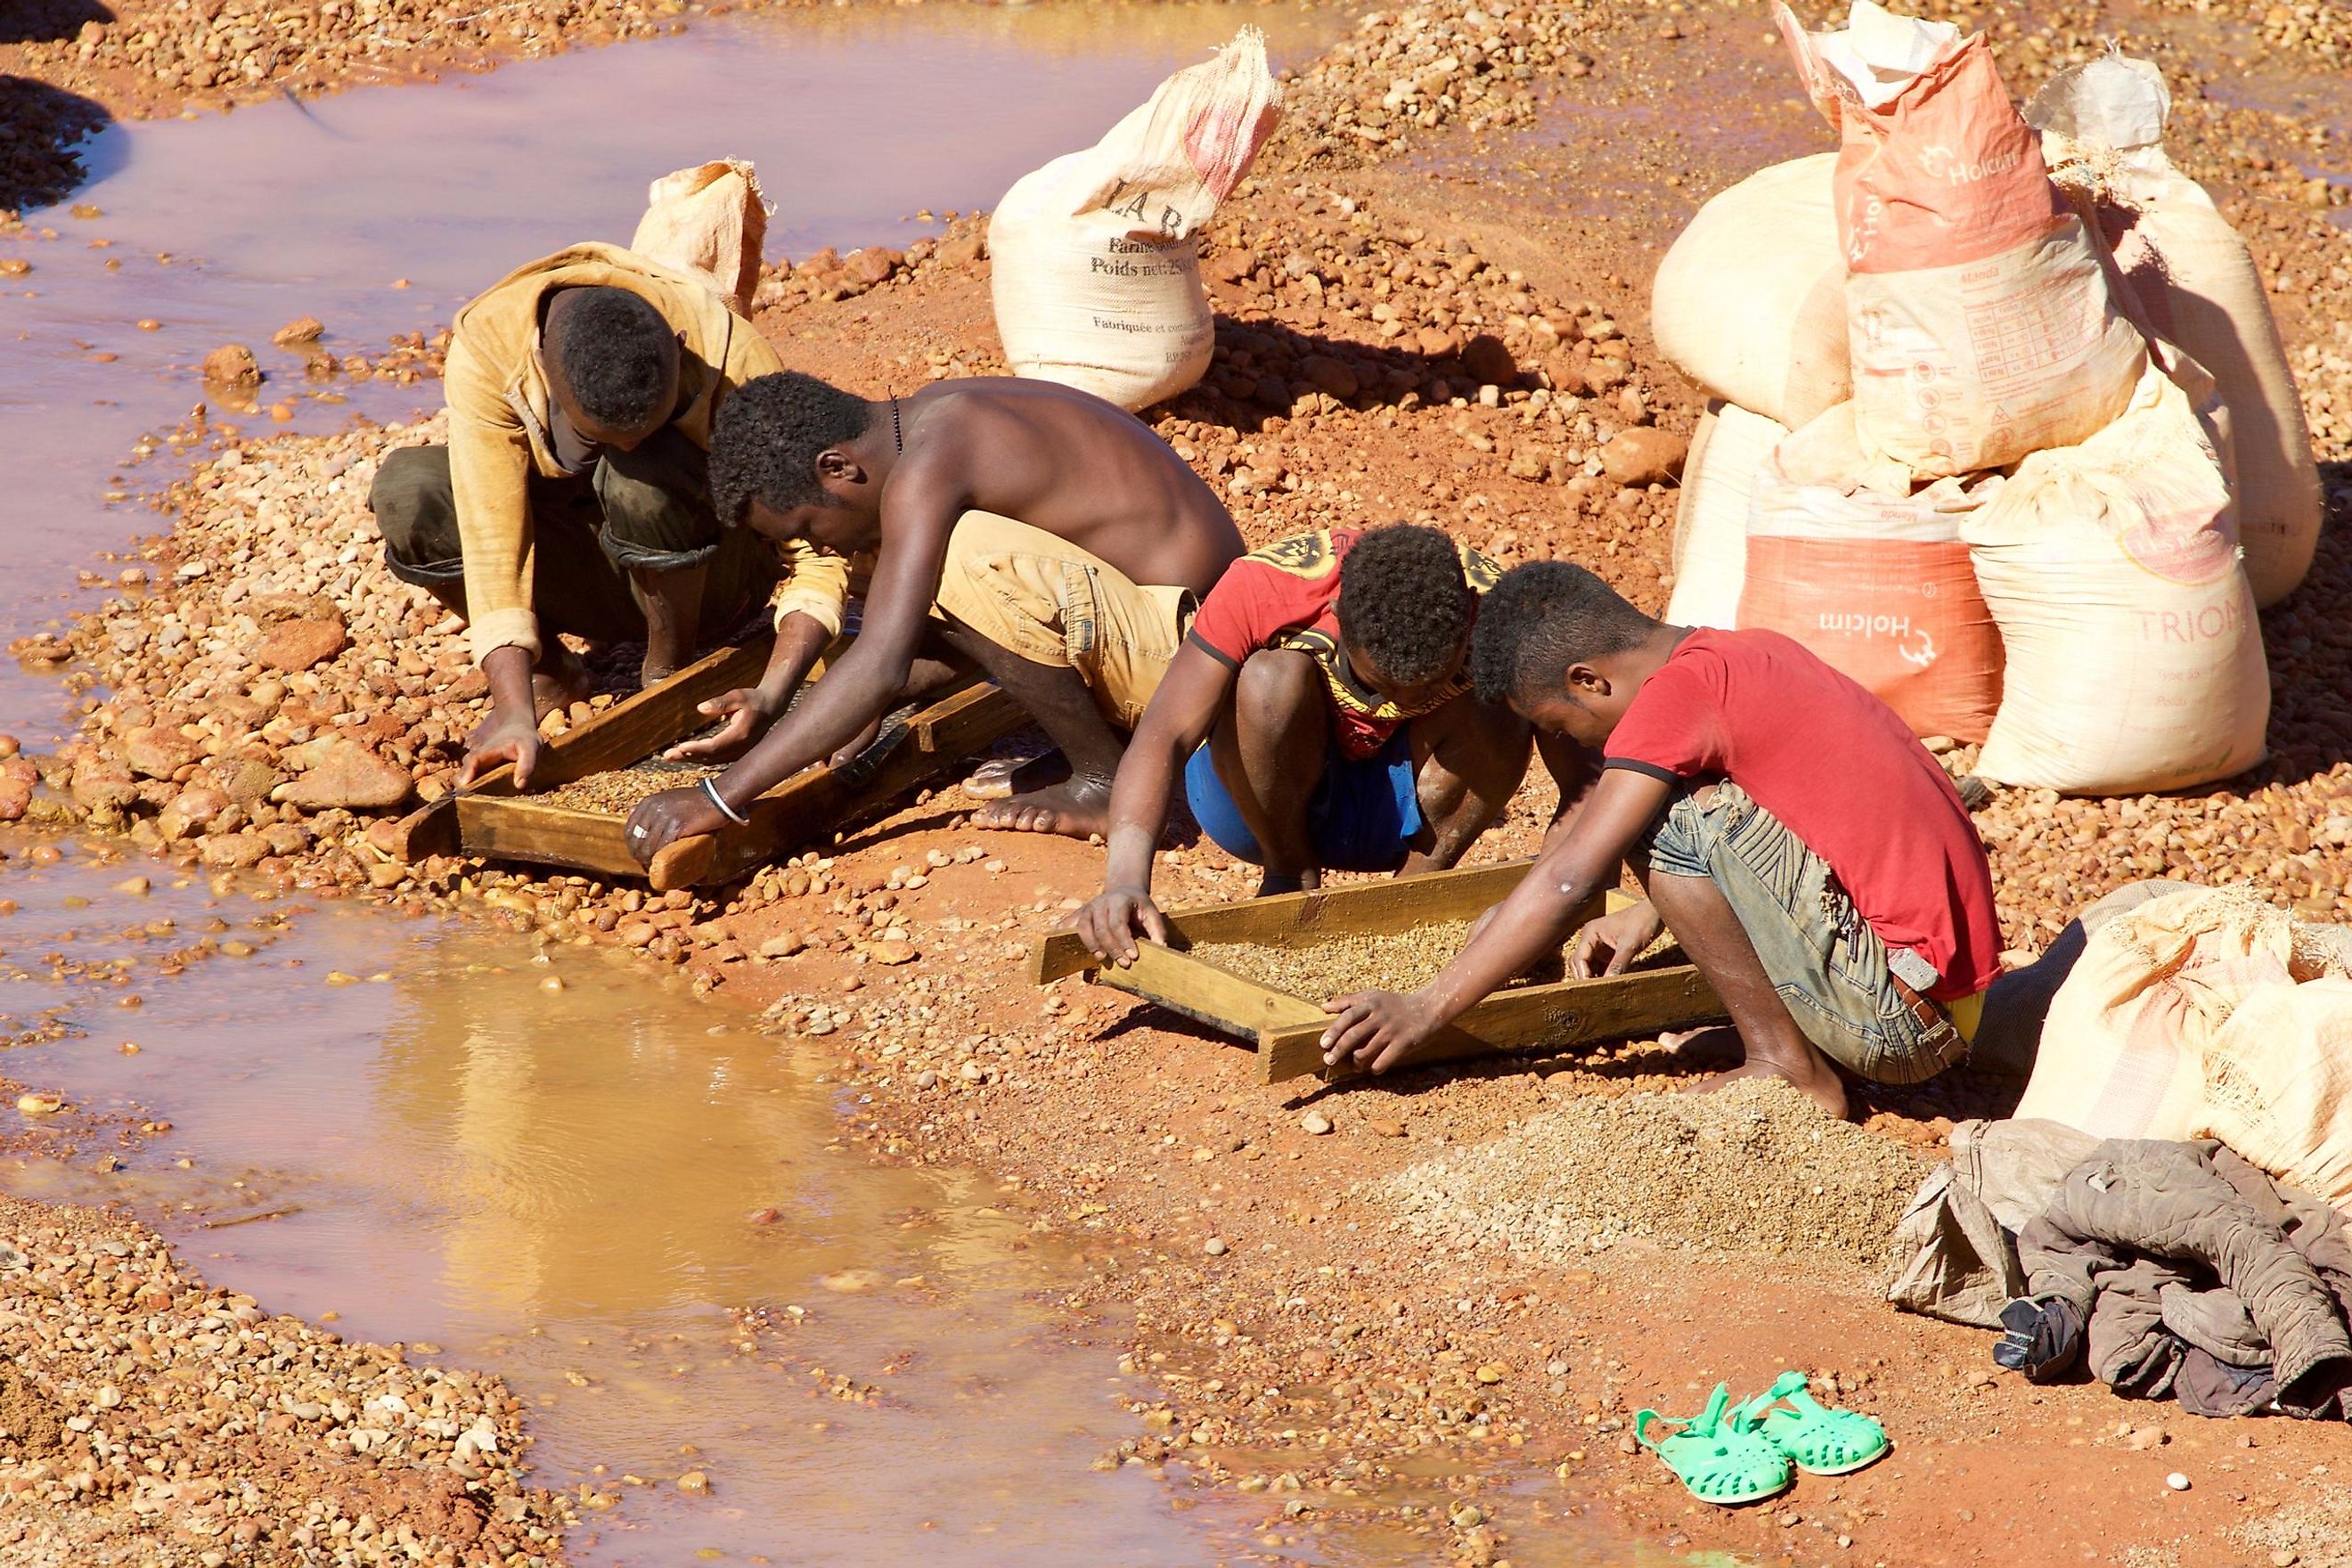 The mining industry in Africa often heavily exploits humans for labor.